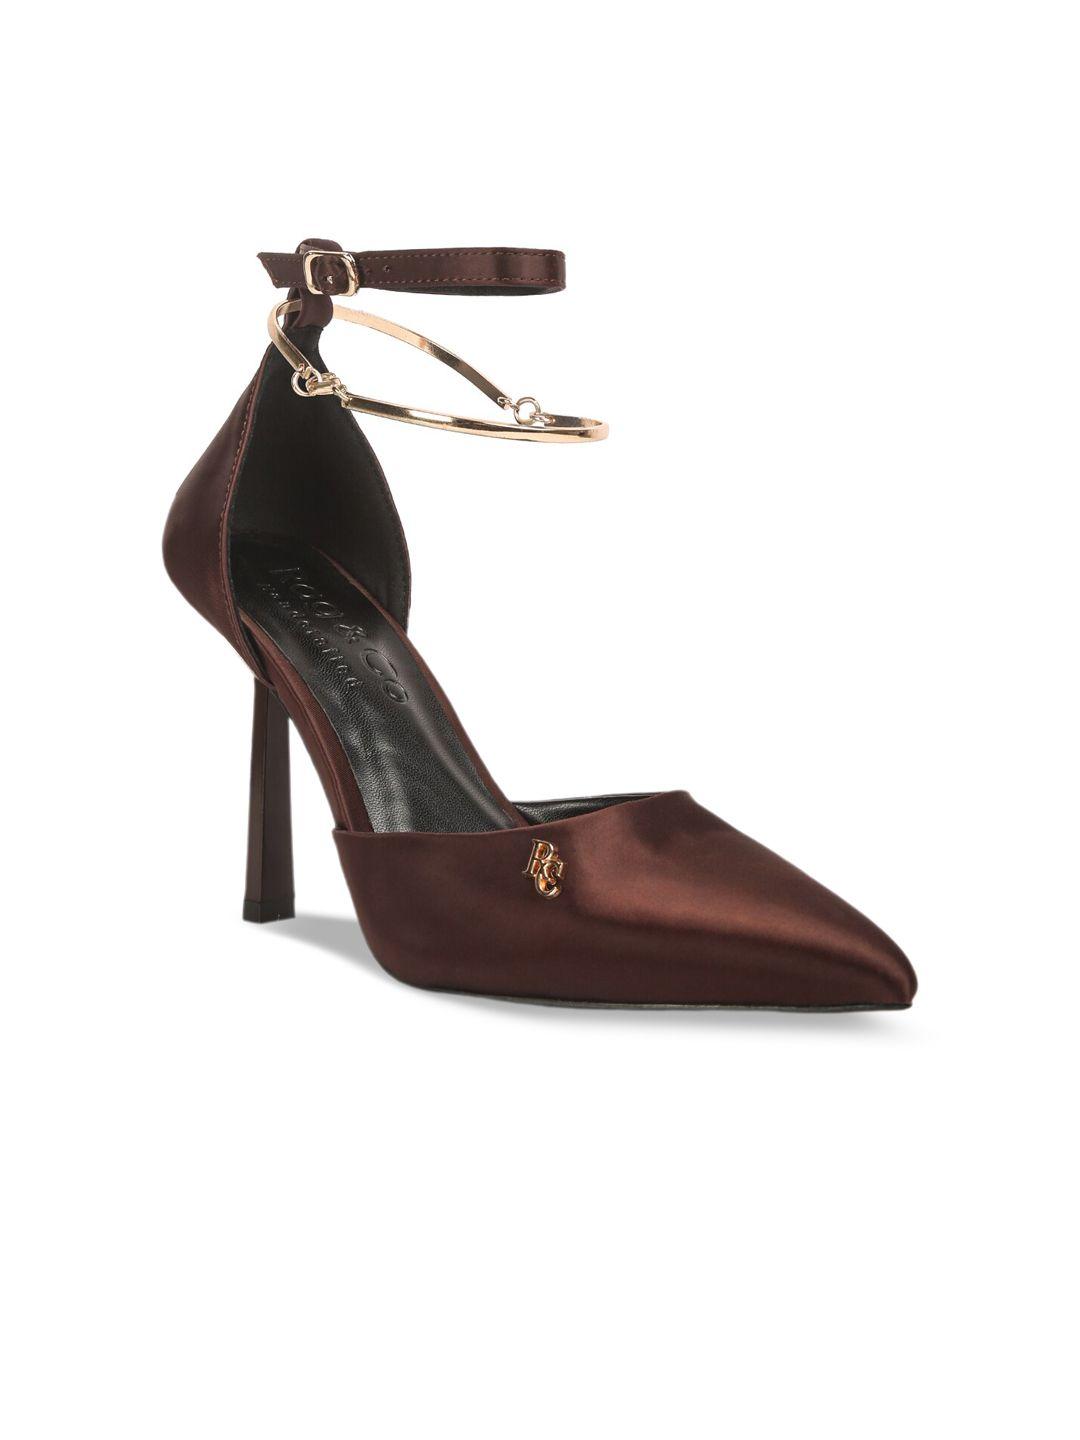 rag & co brown embellished party stiletto pumps